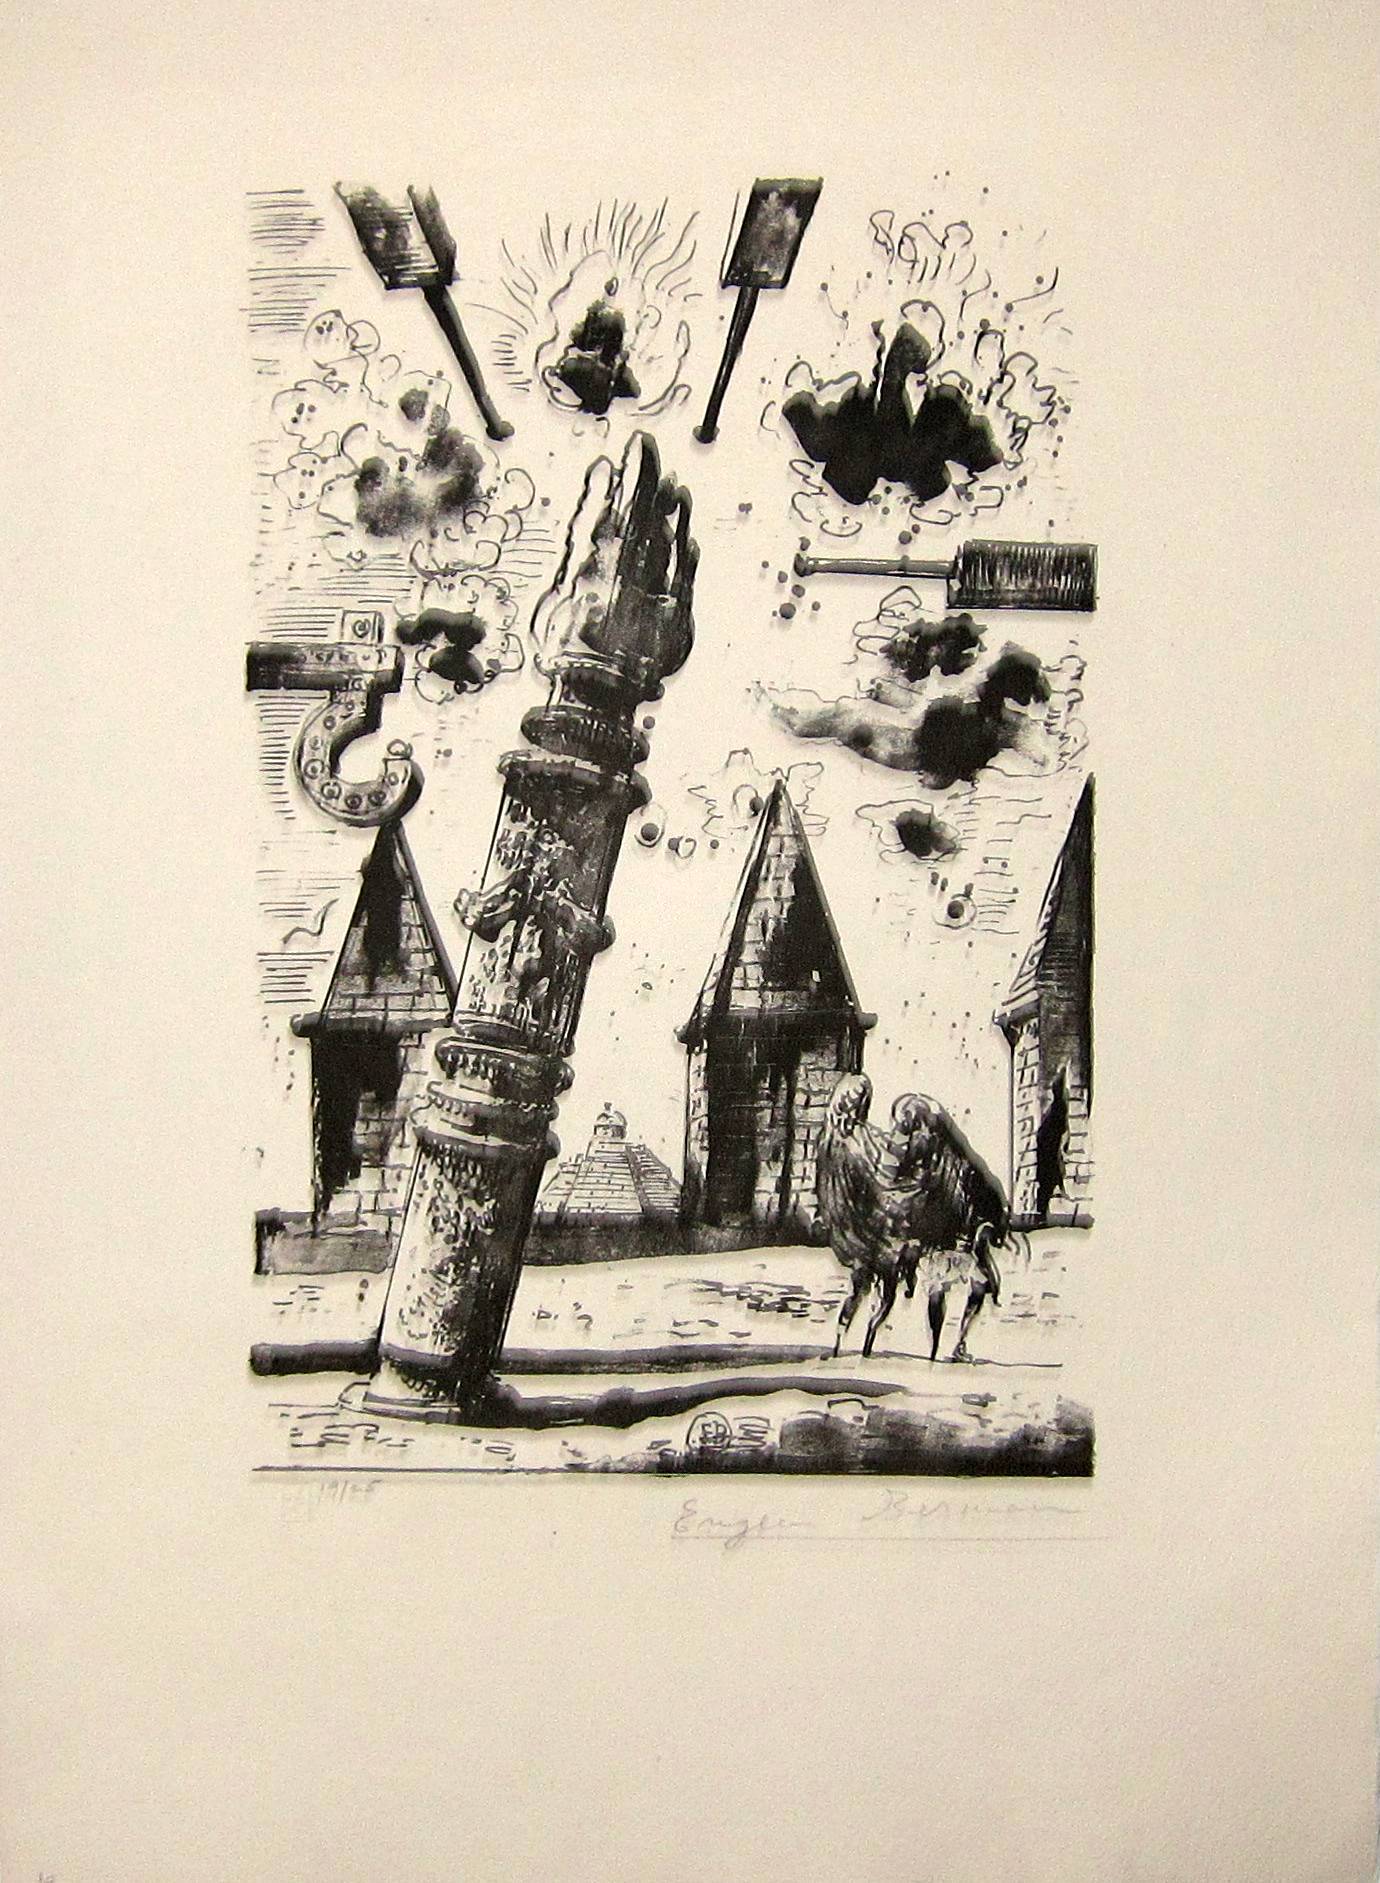 EUGENE BERMAN [1899-1972]. Leaning Flaming Column, 1949. lithograph, edition of 25 [19/25]. signed